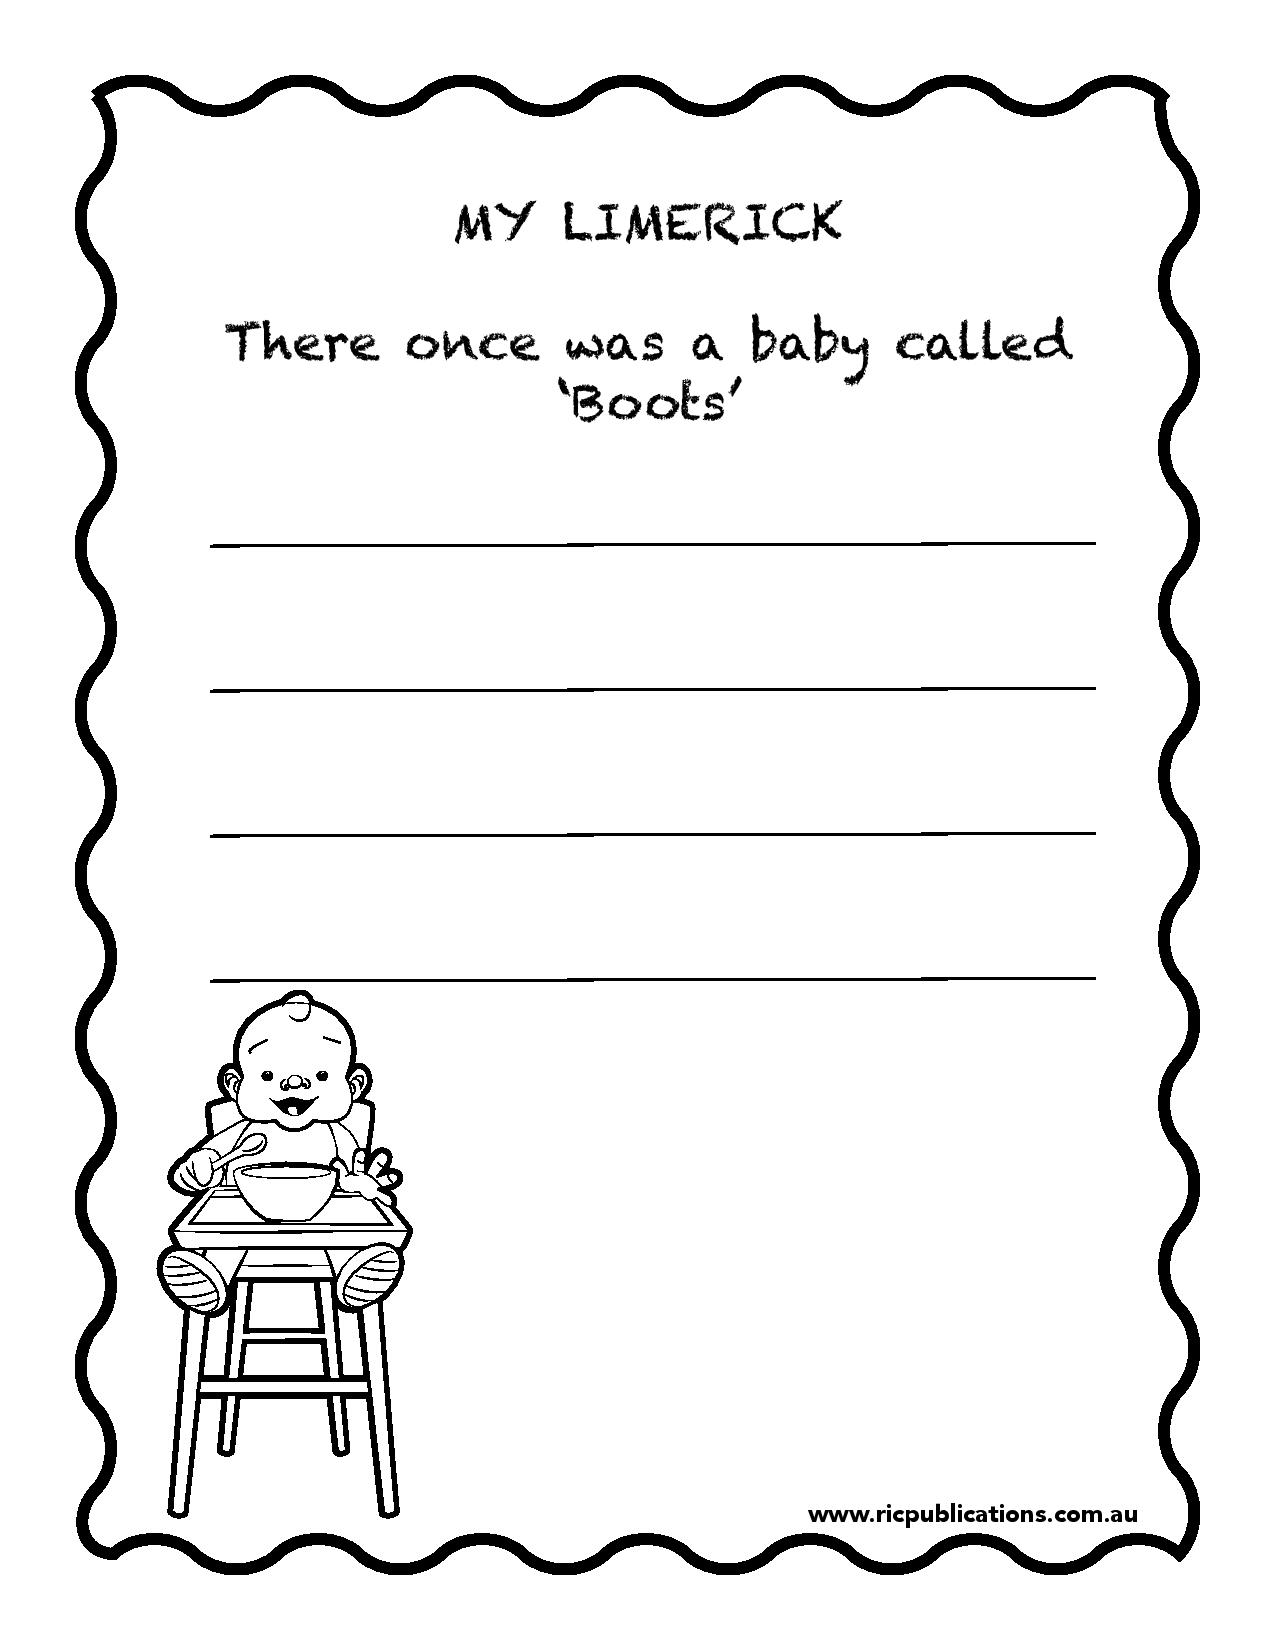 RIC Publications Limerick Competition-page-003